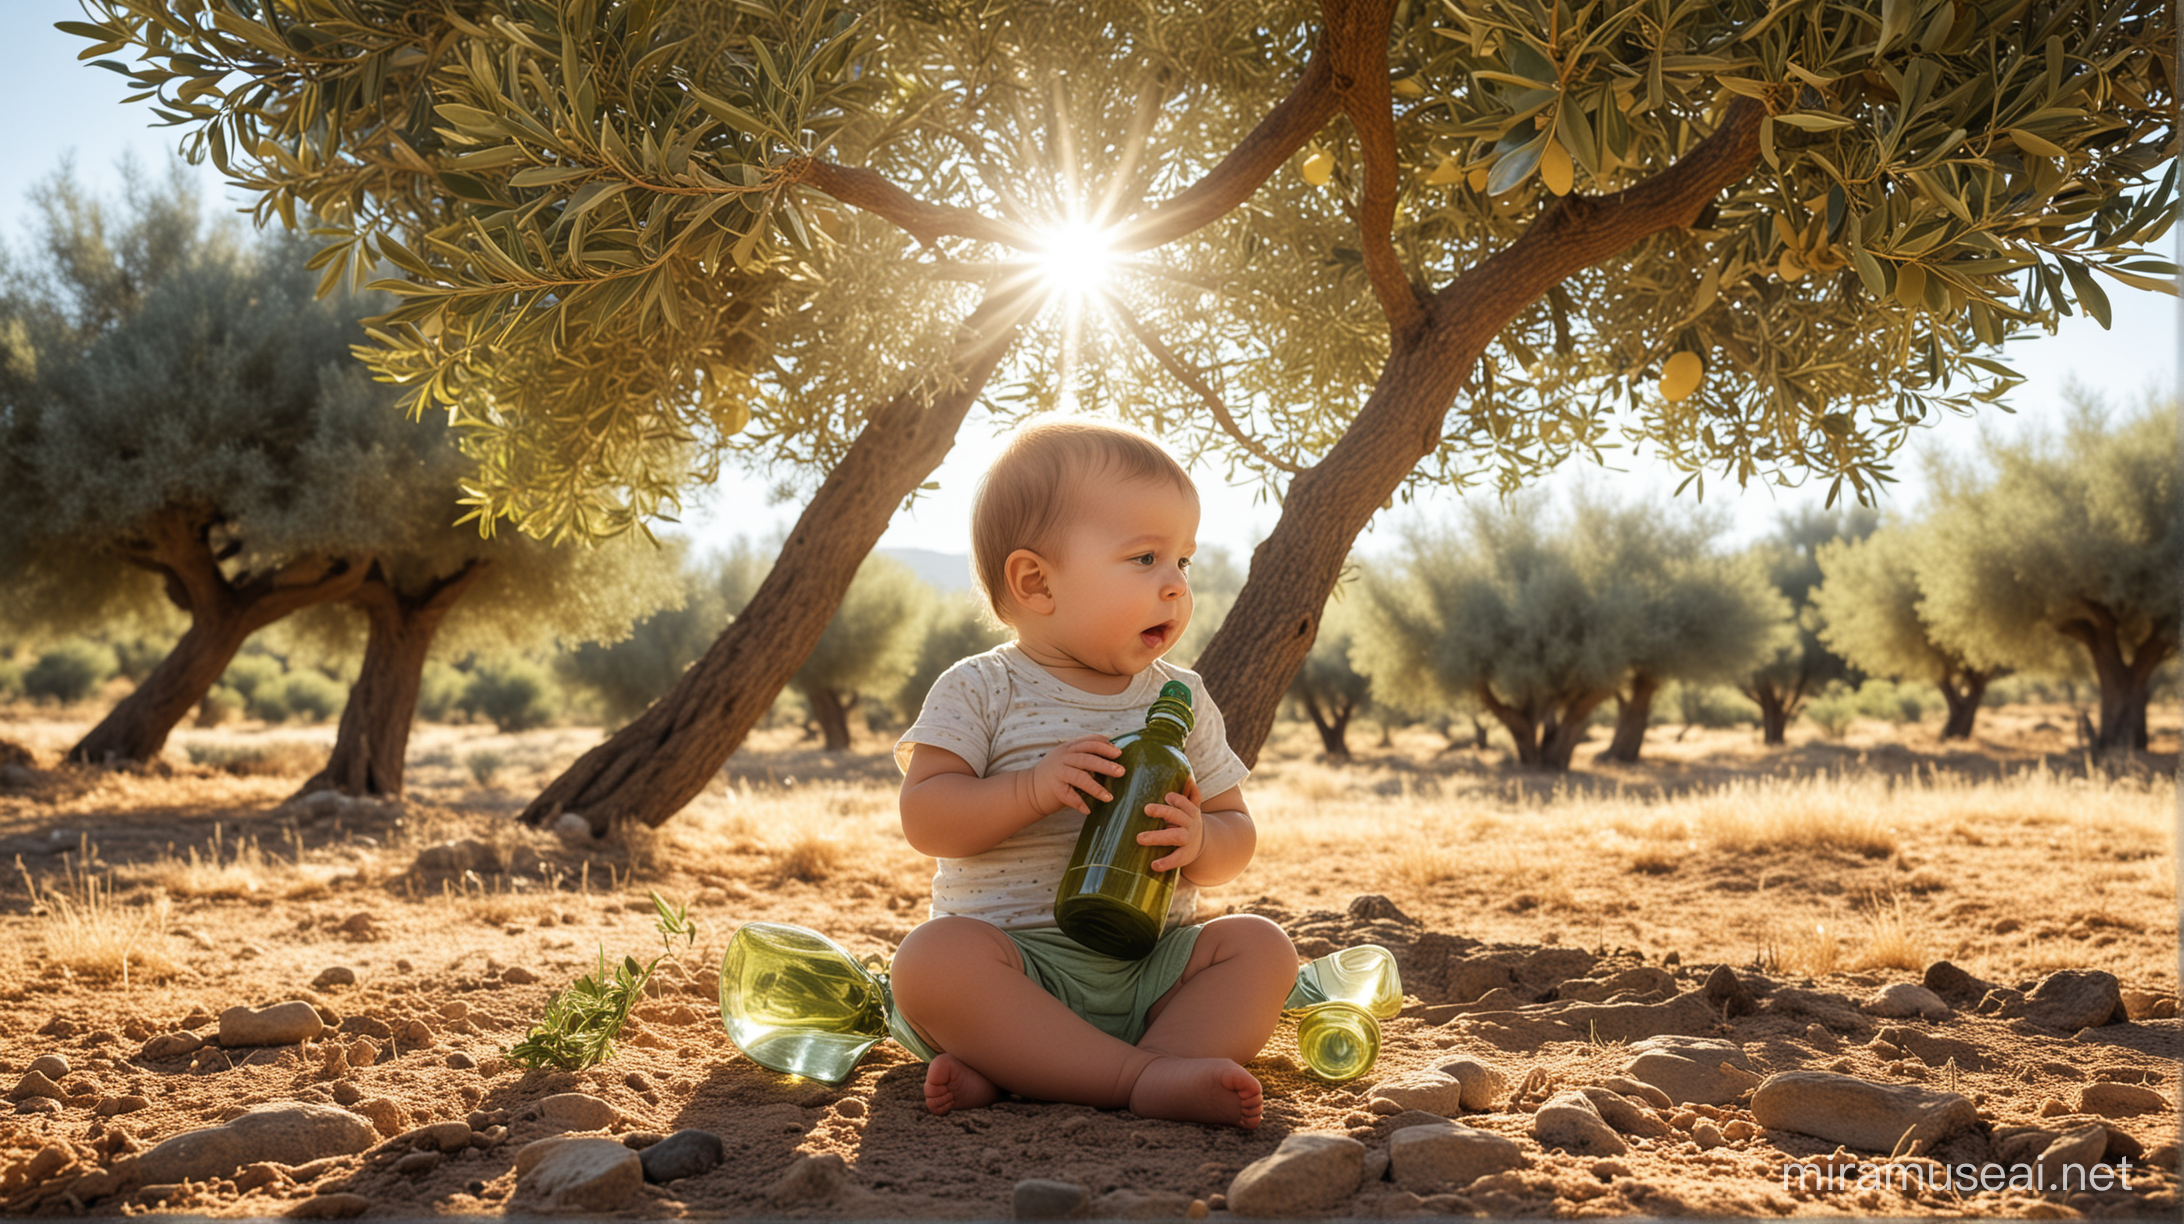 create a photo of a baby sitting under one olive tree. The baby is holding a transparent bottle that contains olive oil. The sun's beams are going through the leaves of the olive tree. Use much green color and make the photo to be realistic as much as you can.